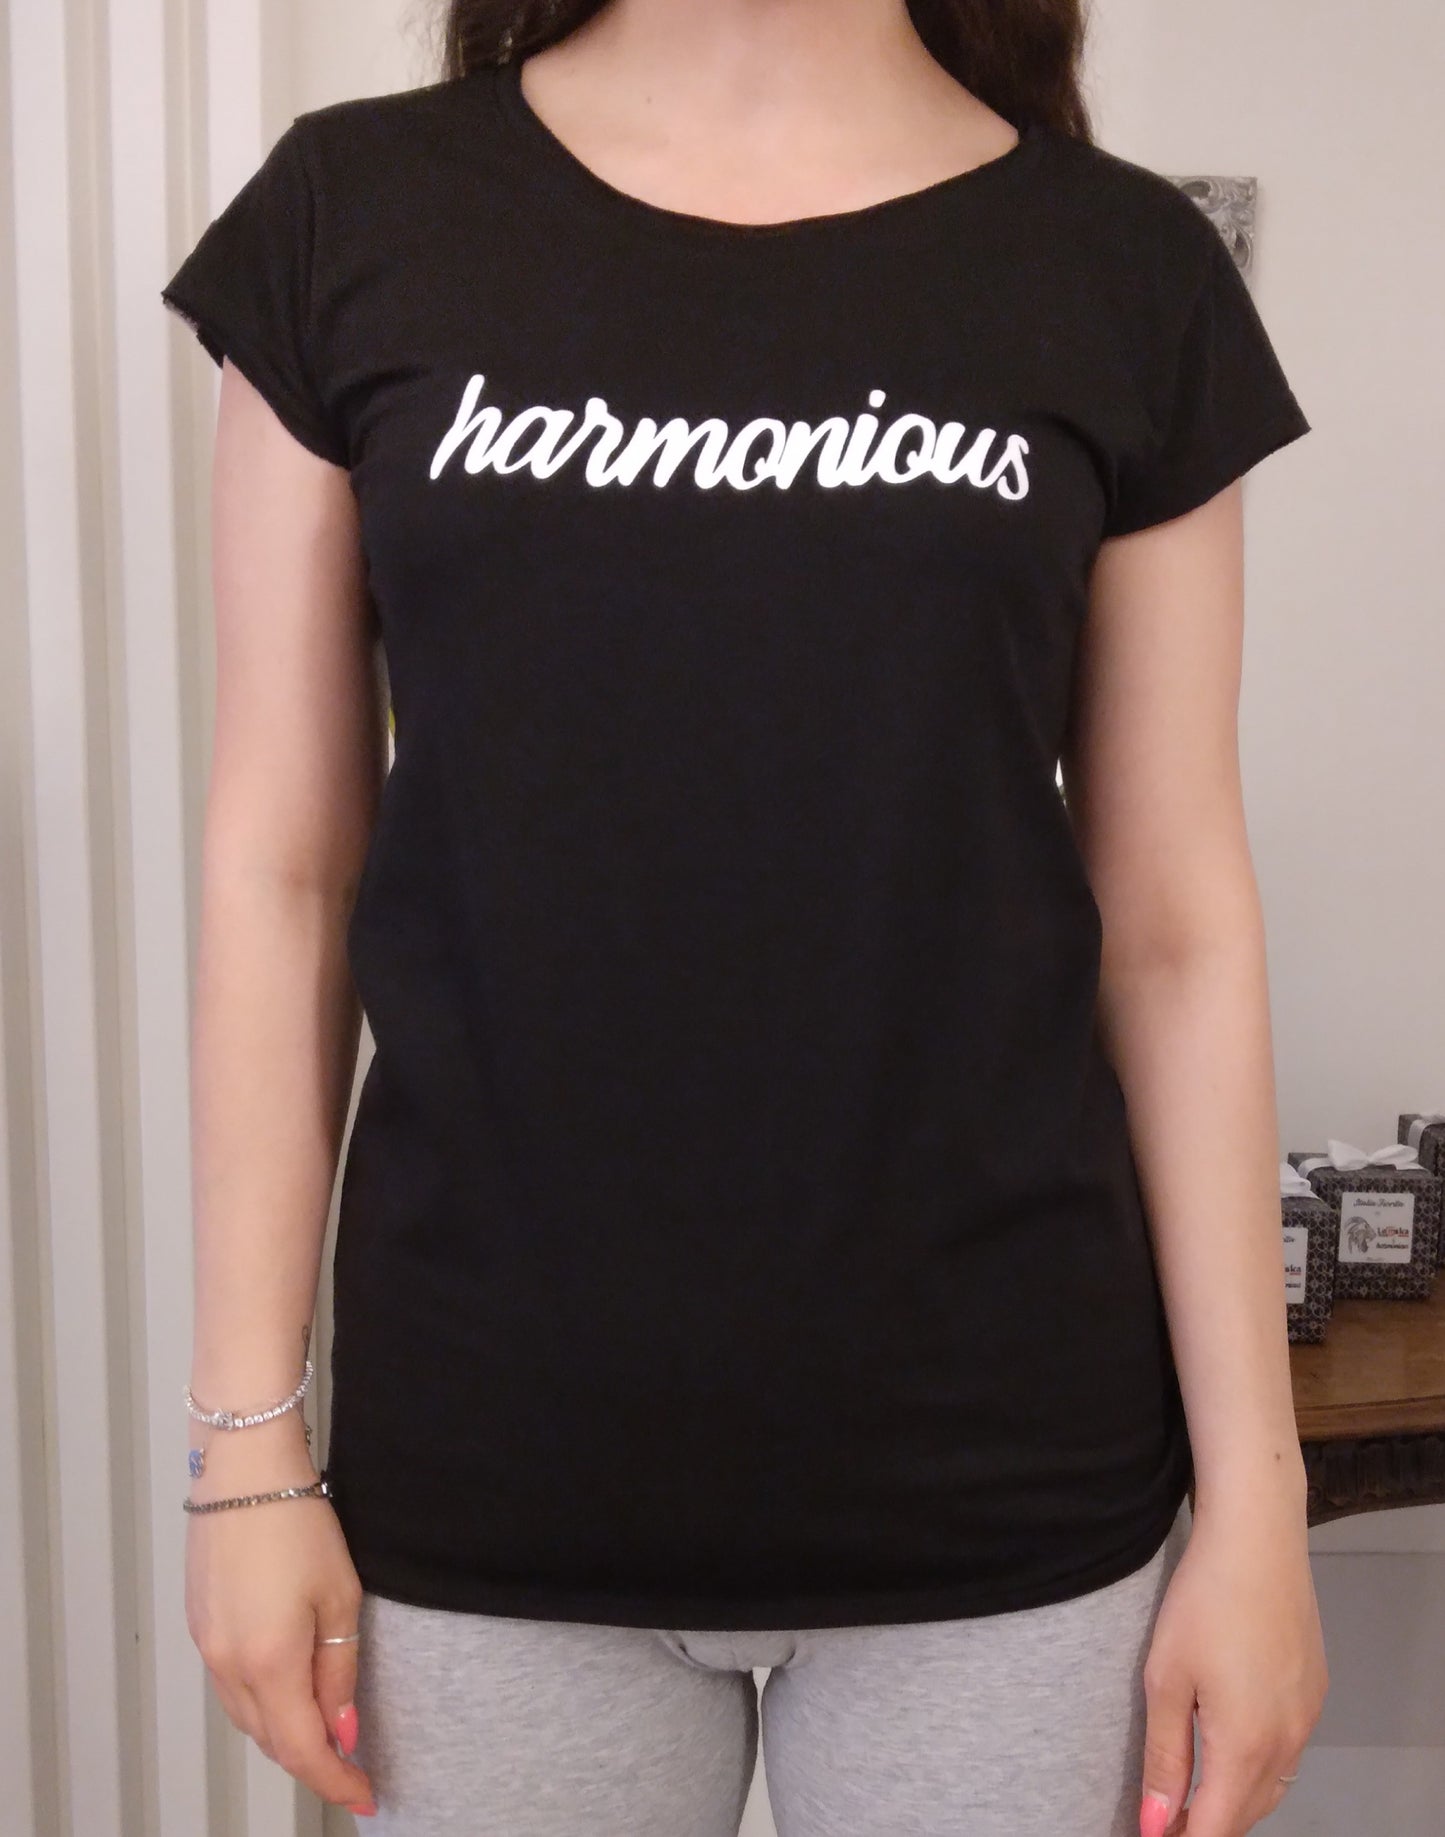 T-shirt Donna Harmonious 100% Made in Italy